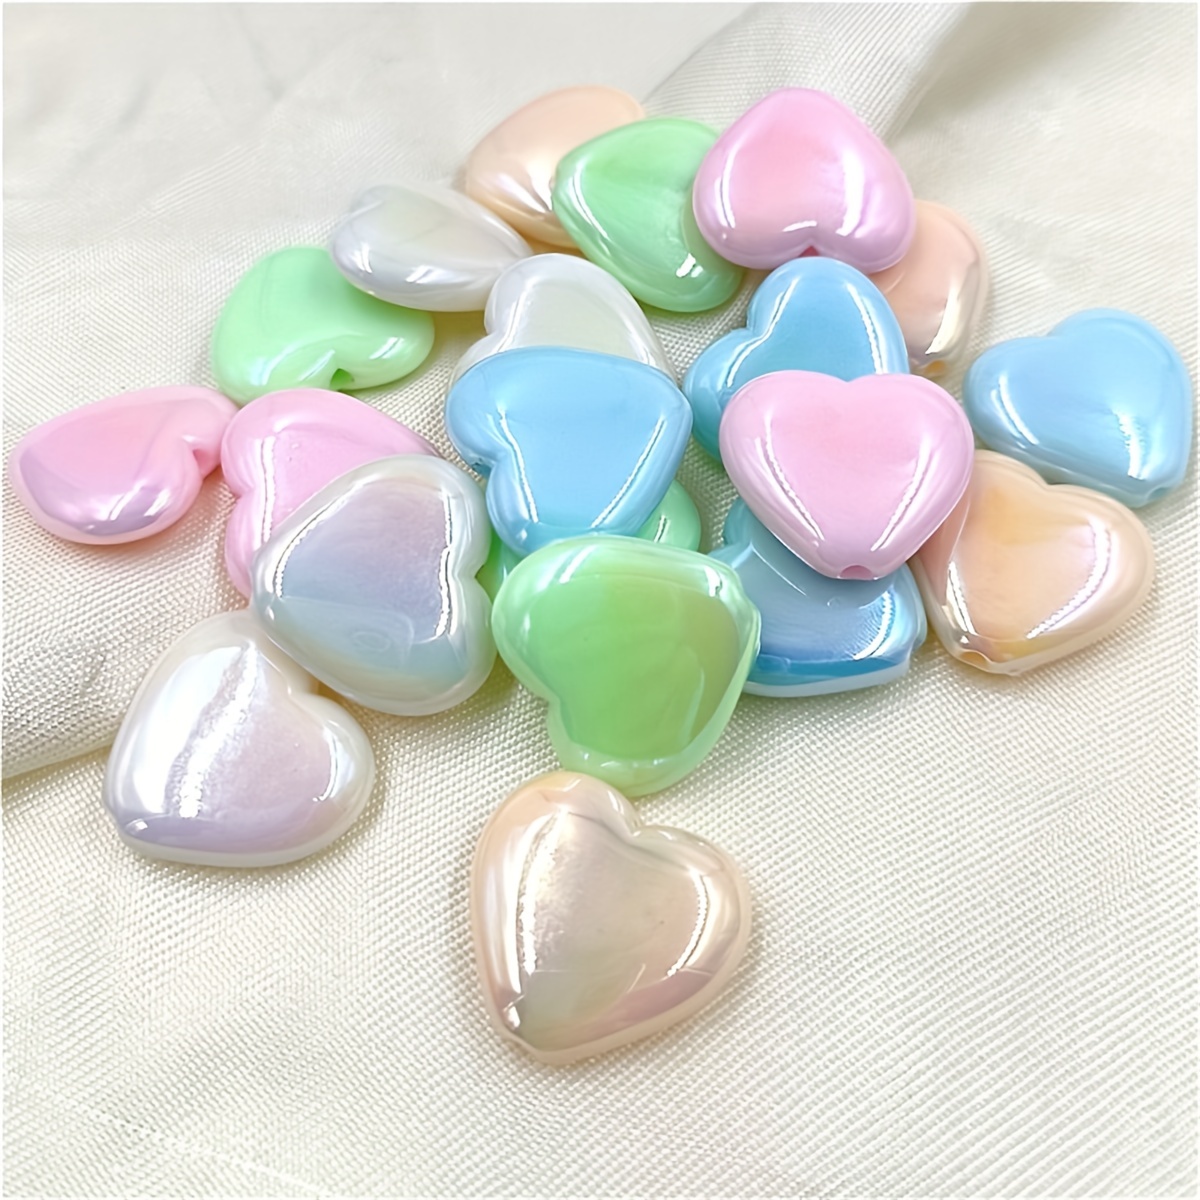 Hot Pink Heart Beads for Jewelry Making, Bright Pink Beads for